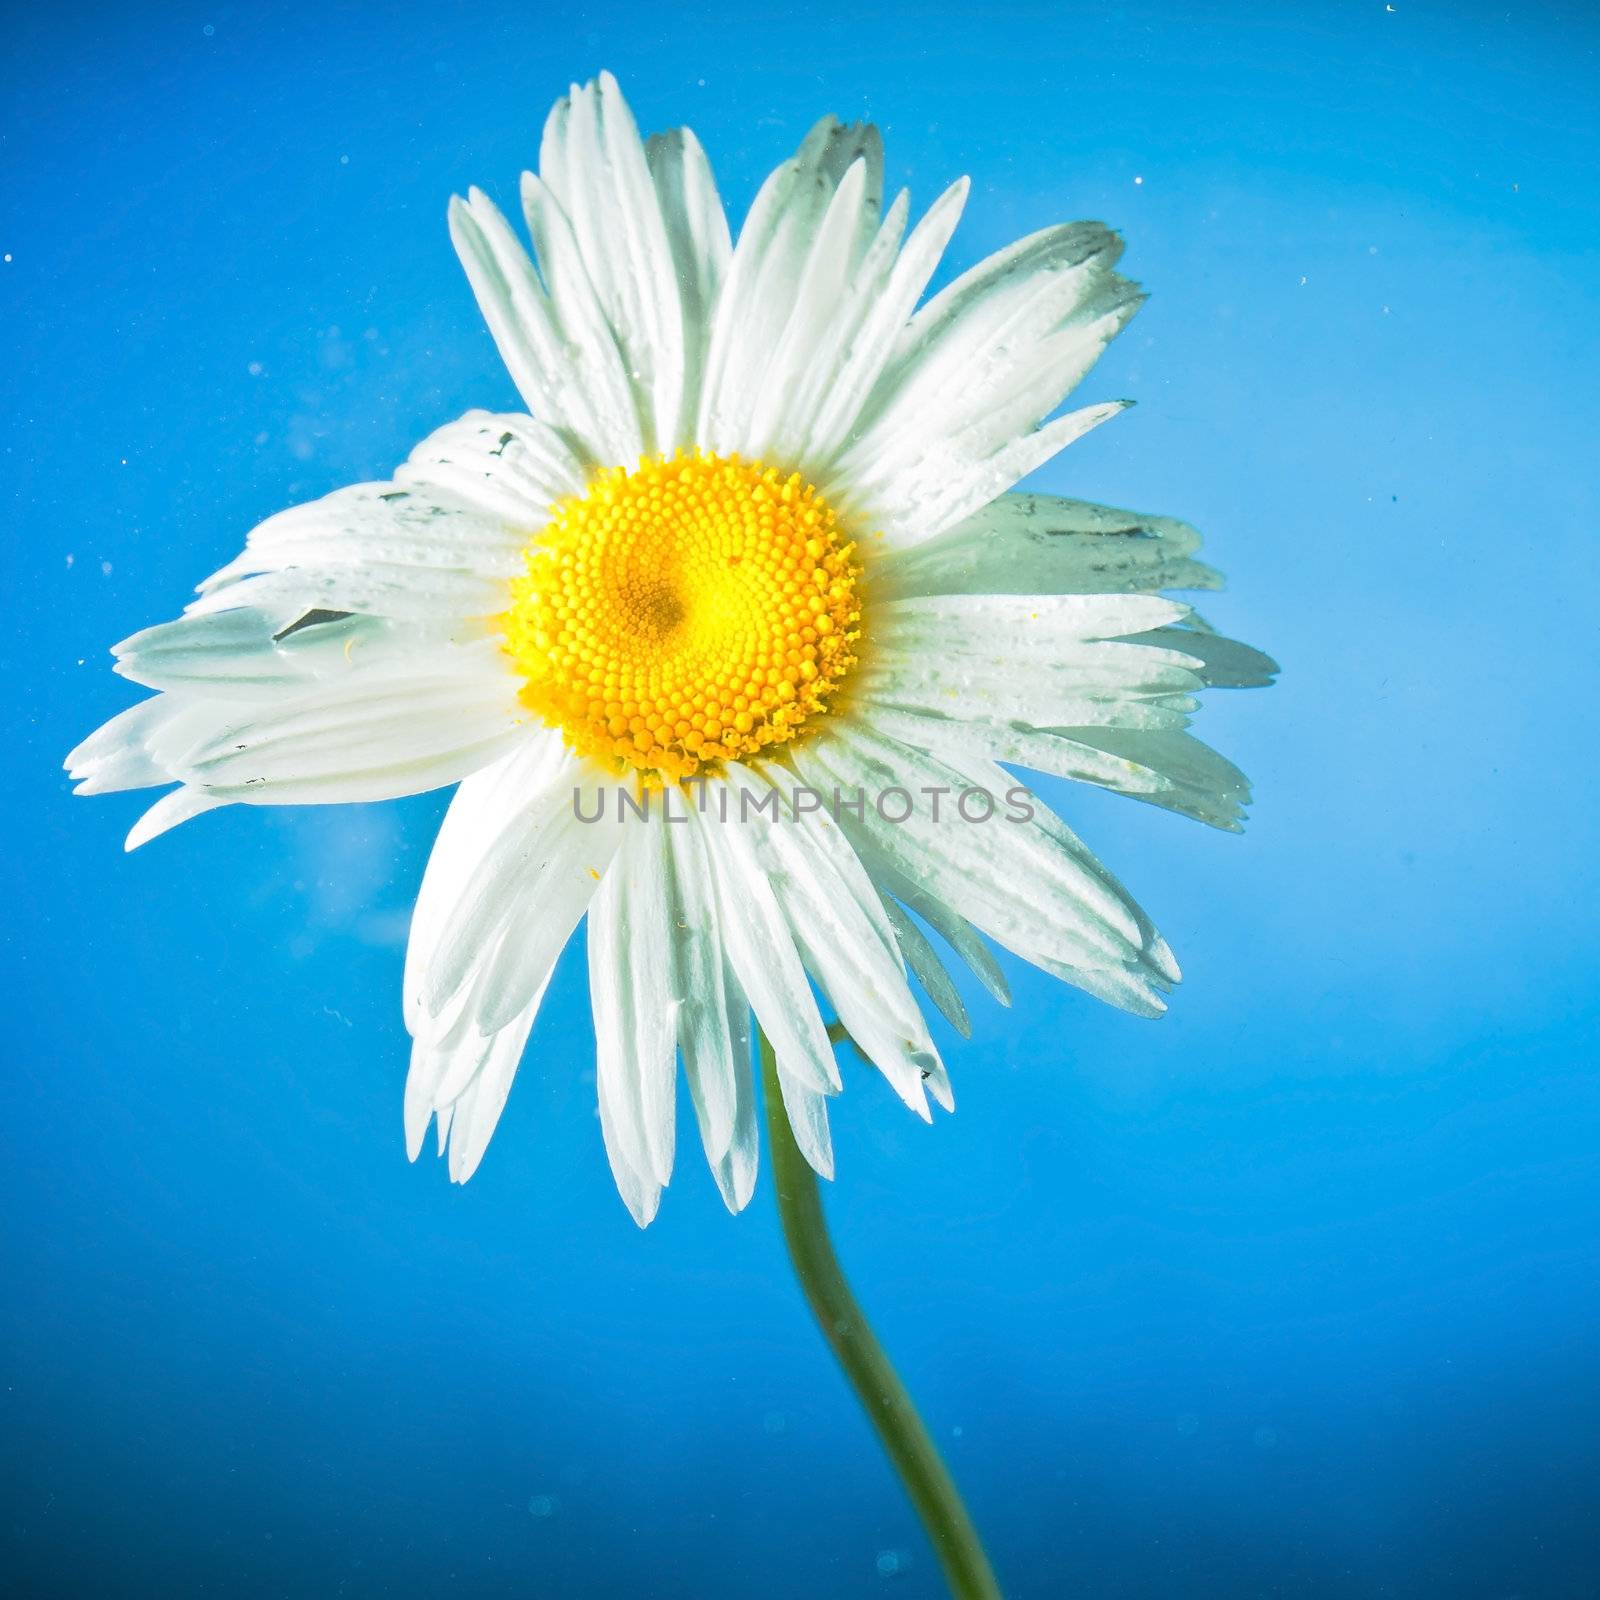 camomile on blue background  by shebeko